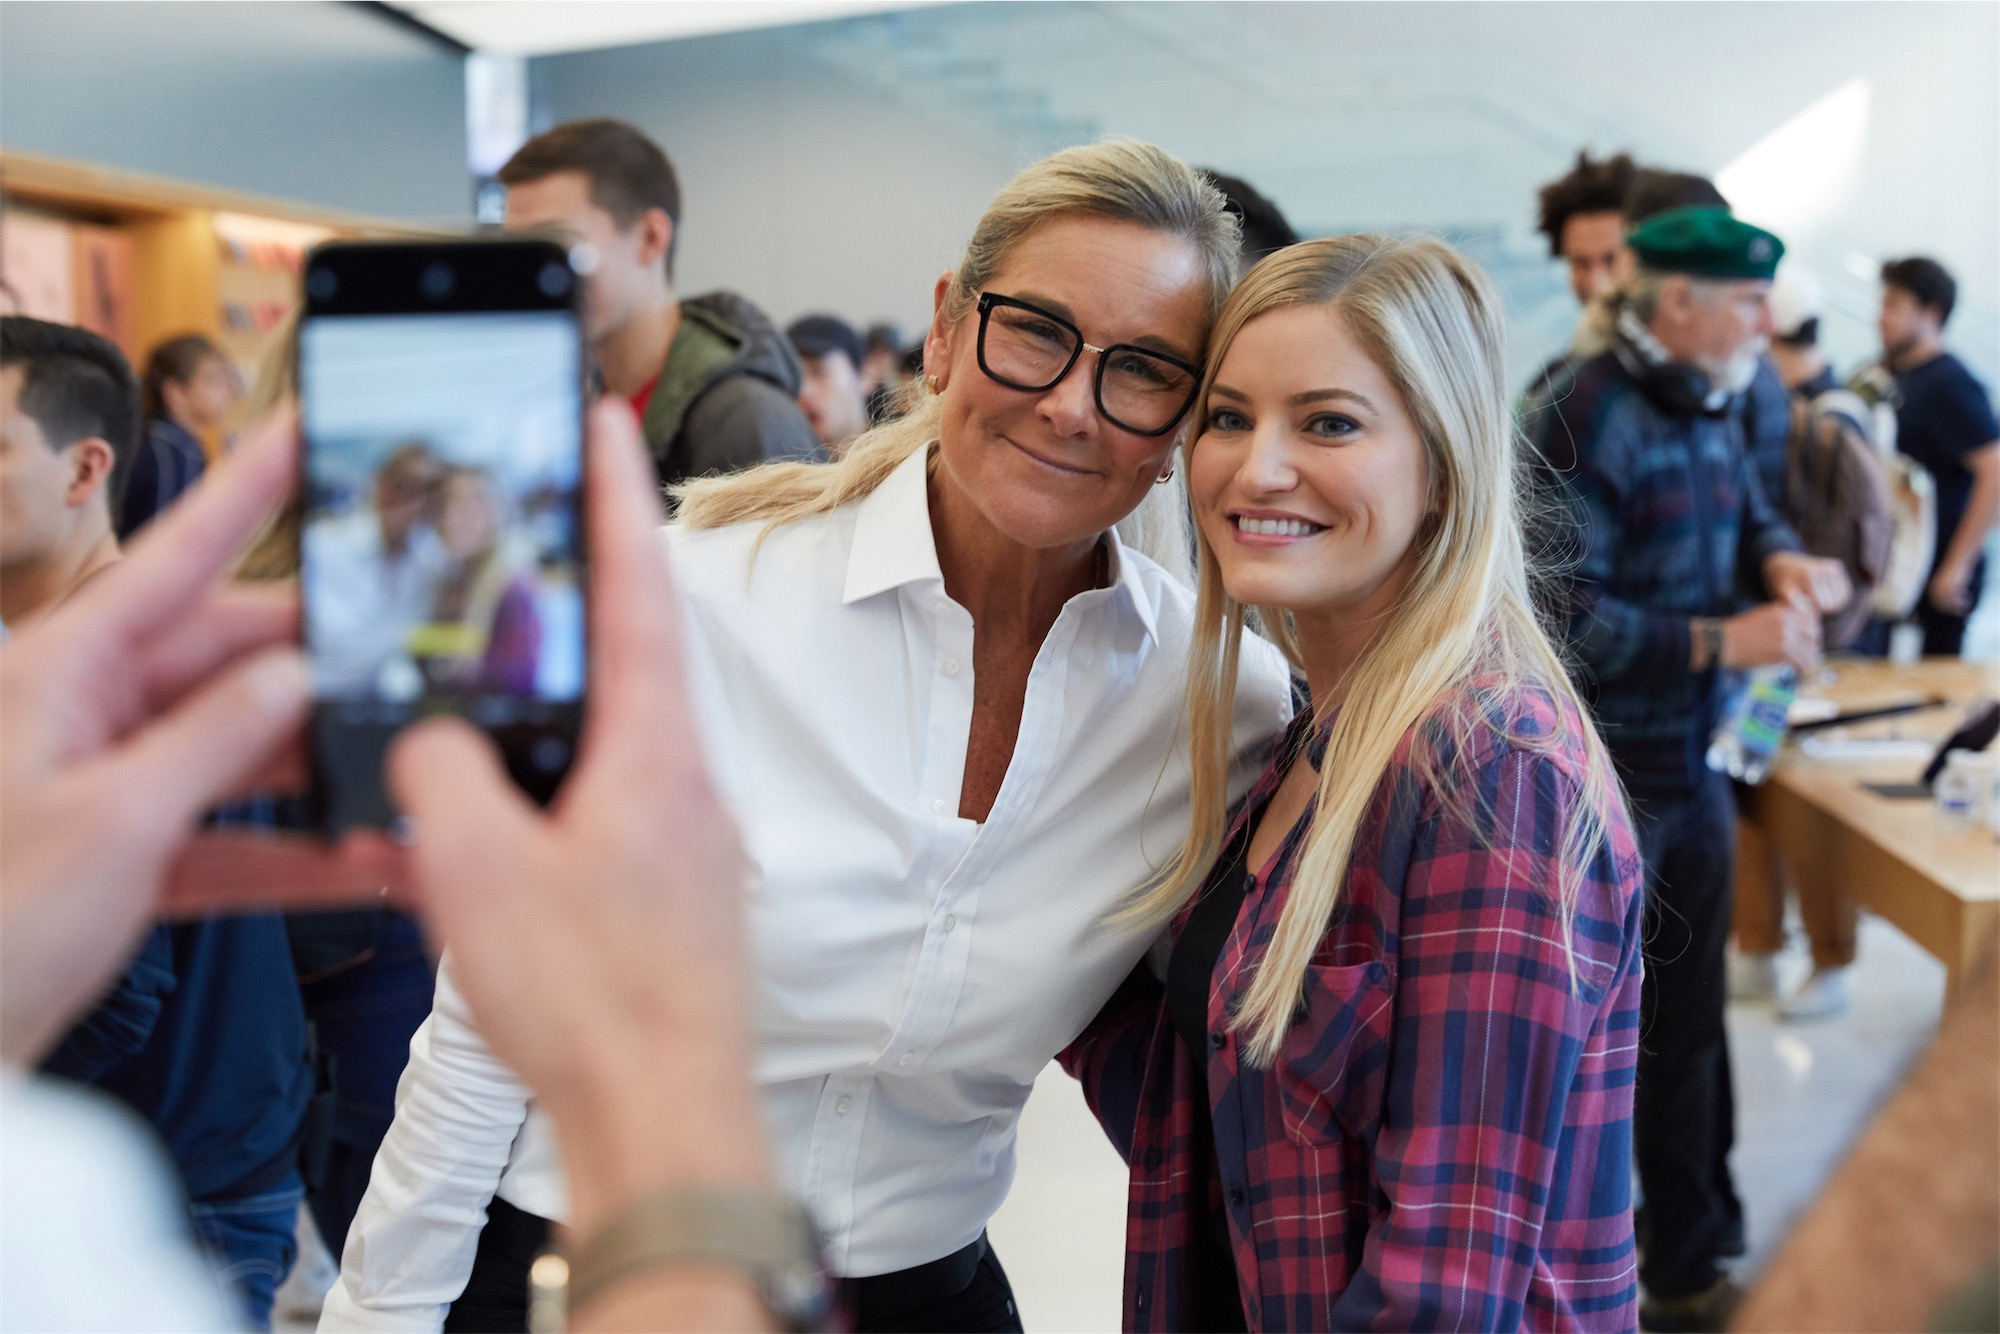 Angela Ahrendts on launch of new iPhones and Apple Watch in Apple stores